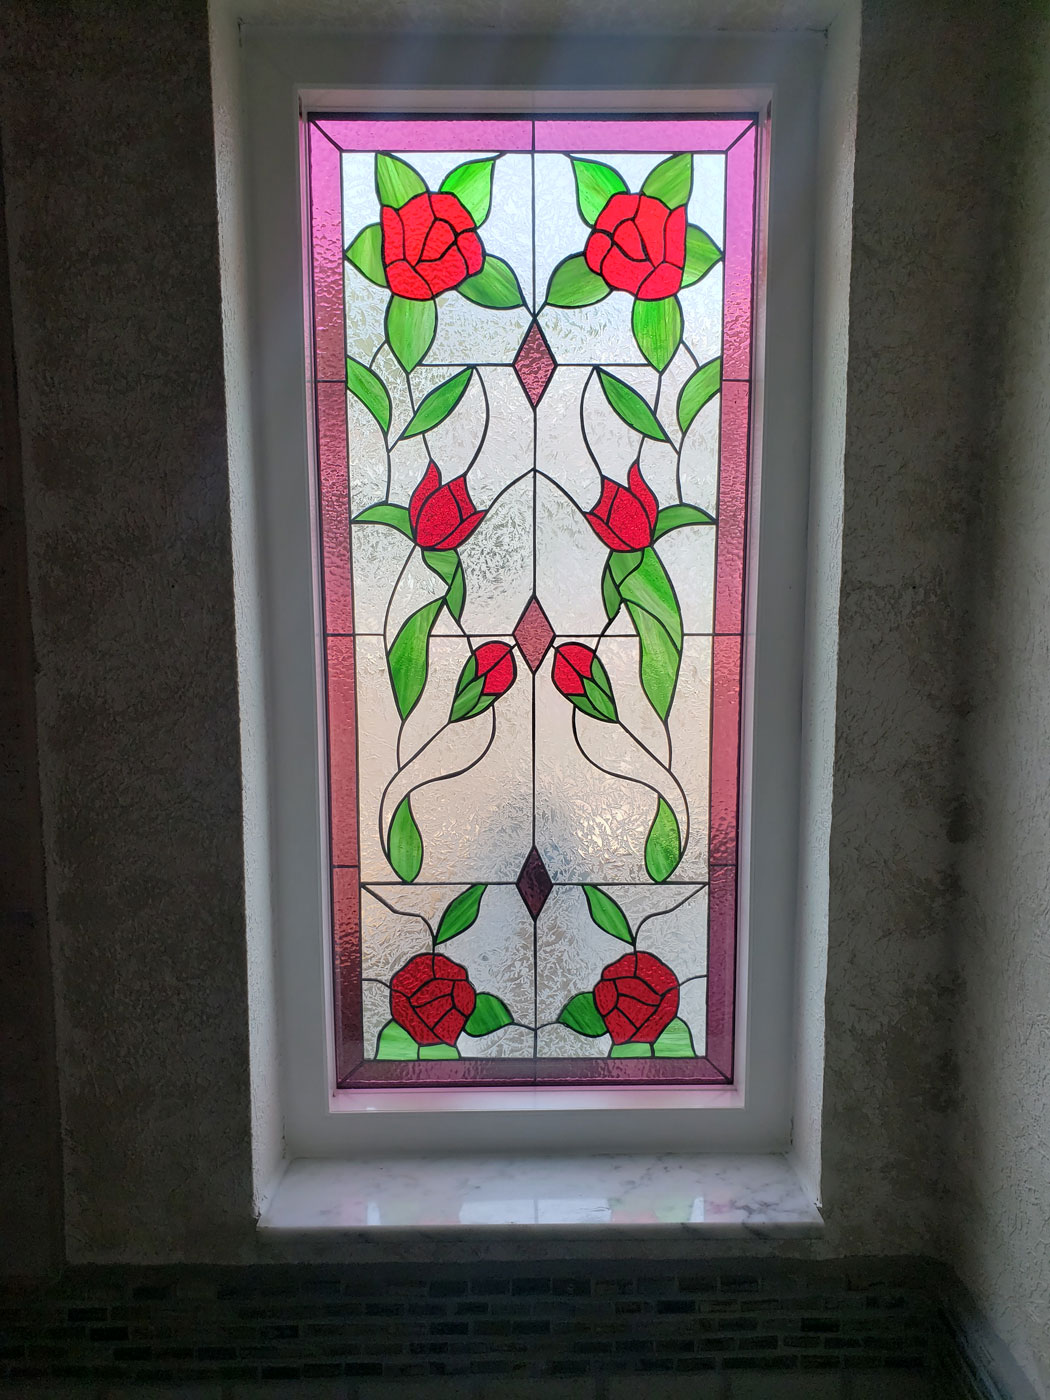 Installed, roses , stained glass in tempered glass and vinyl frame